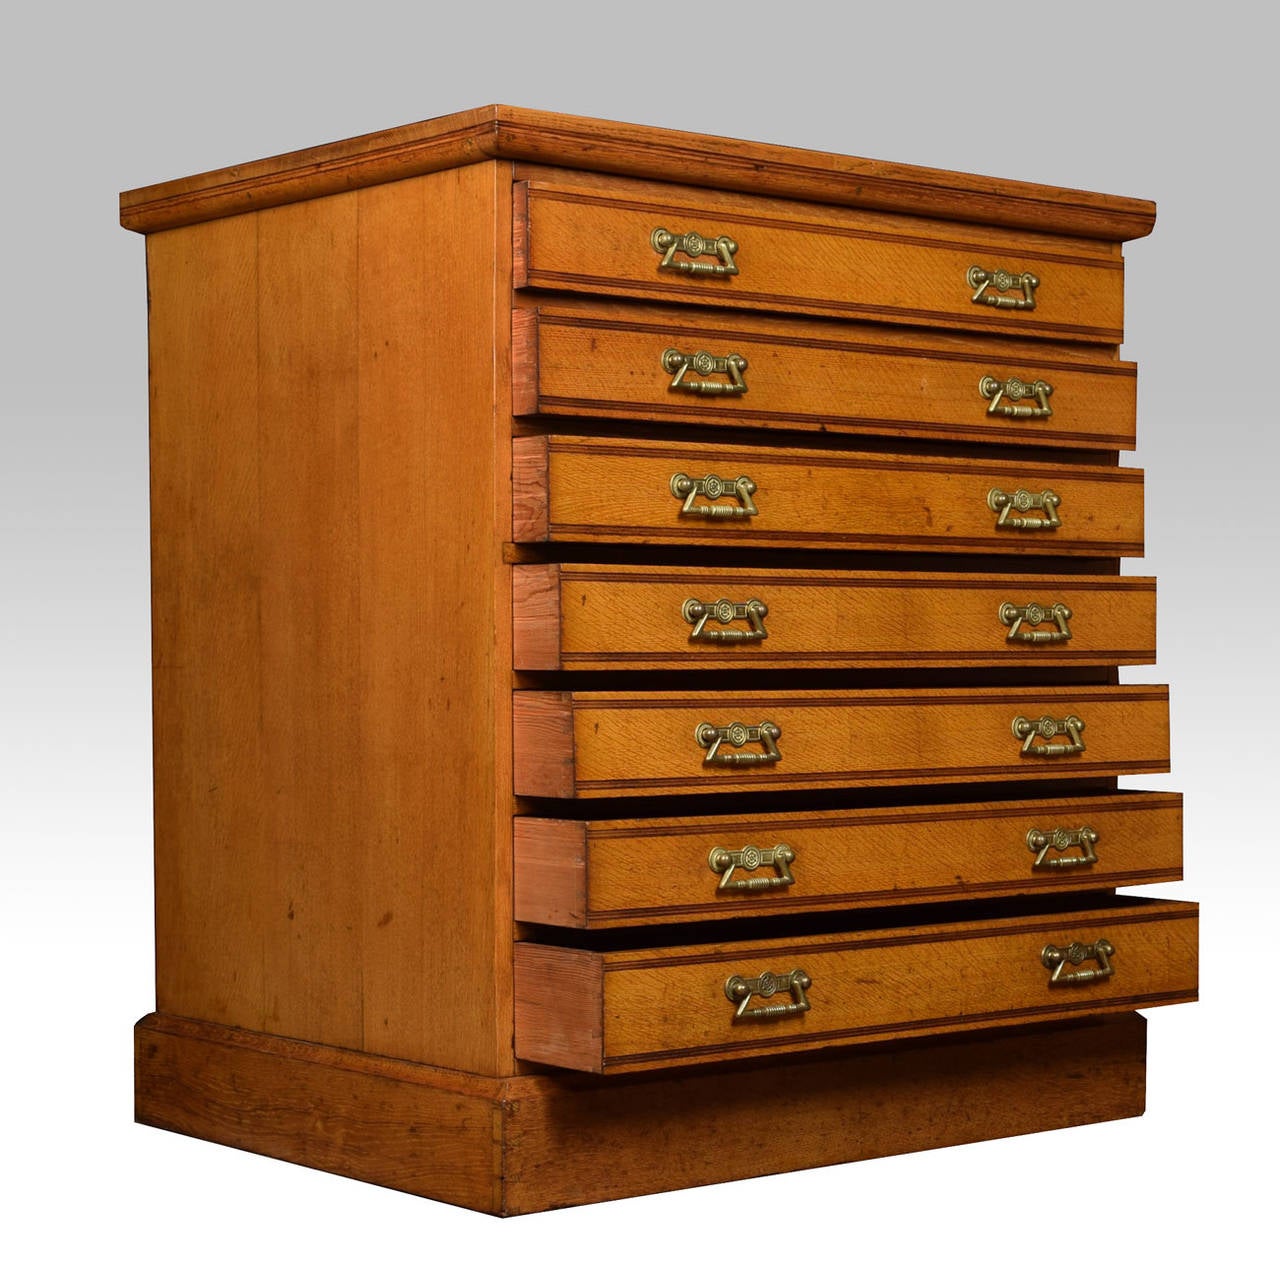 Edwardian oak architects plan chest the large rectangular top above seven long drawers with string inlay and brass tooled handles all raised up on a plinth base.

Dimensions

Height 41 Inches

Width 36 Inches

Depth 28 Inches